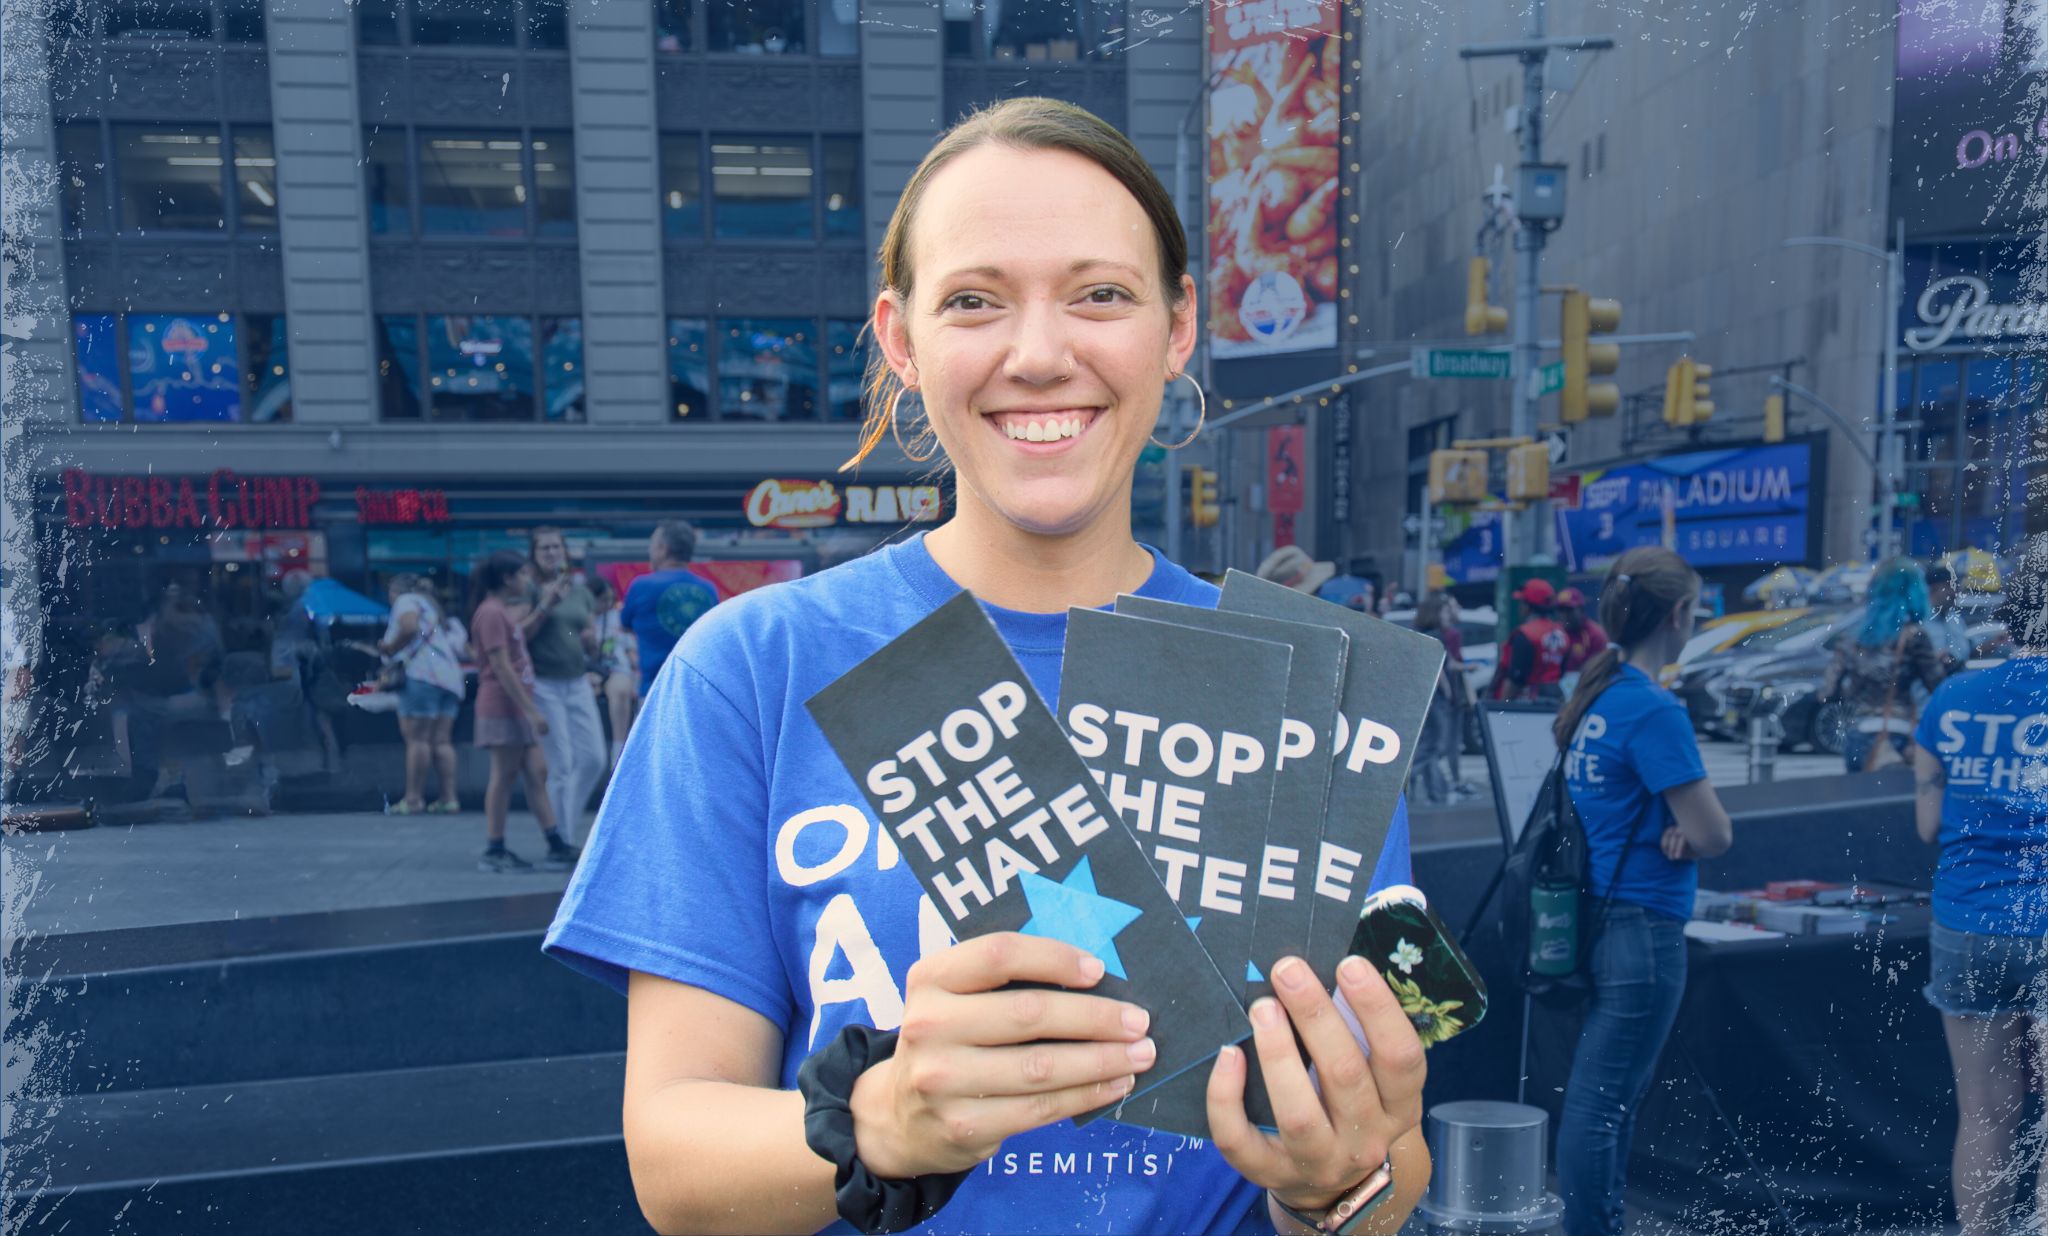 A staff member in a blue "Oppose Antisemitism" shirt passes out materials in Times Square New York